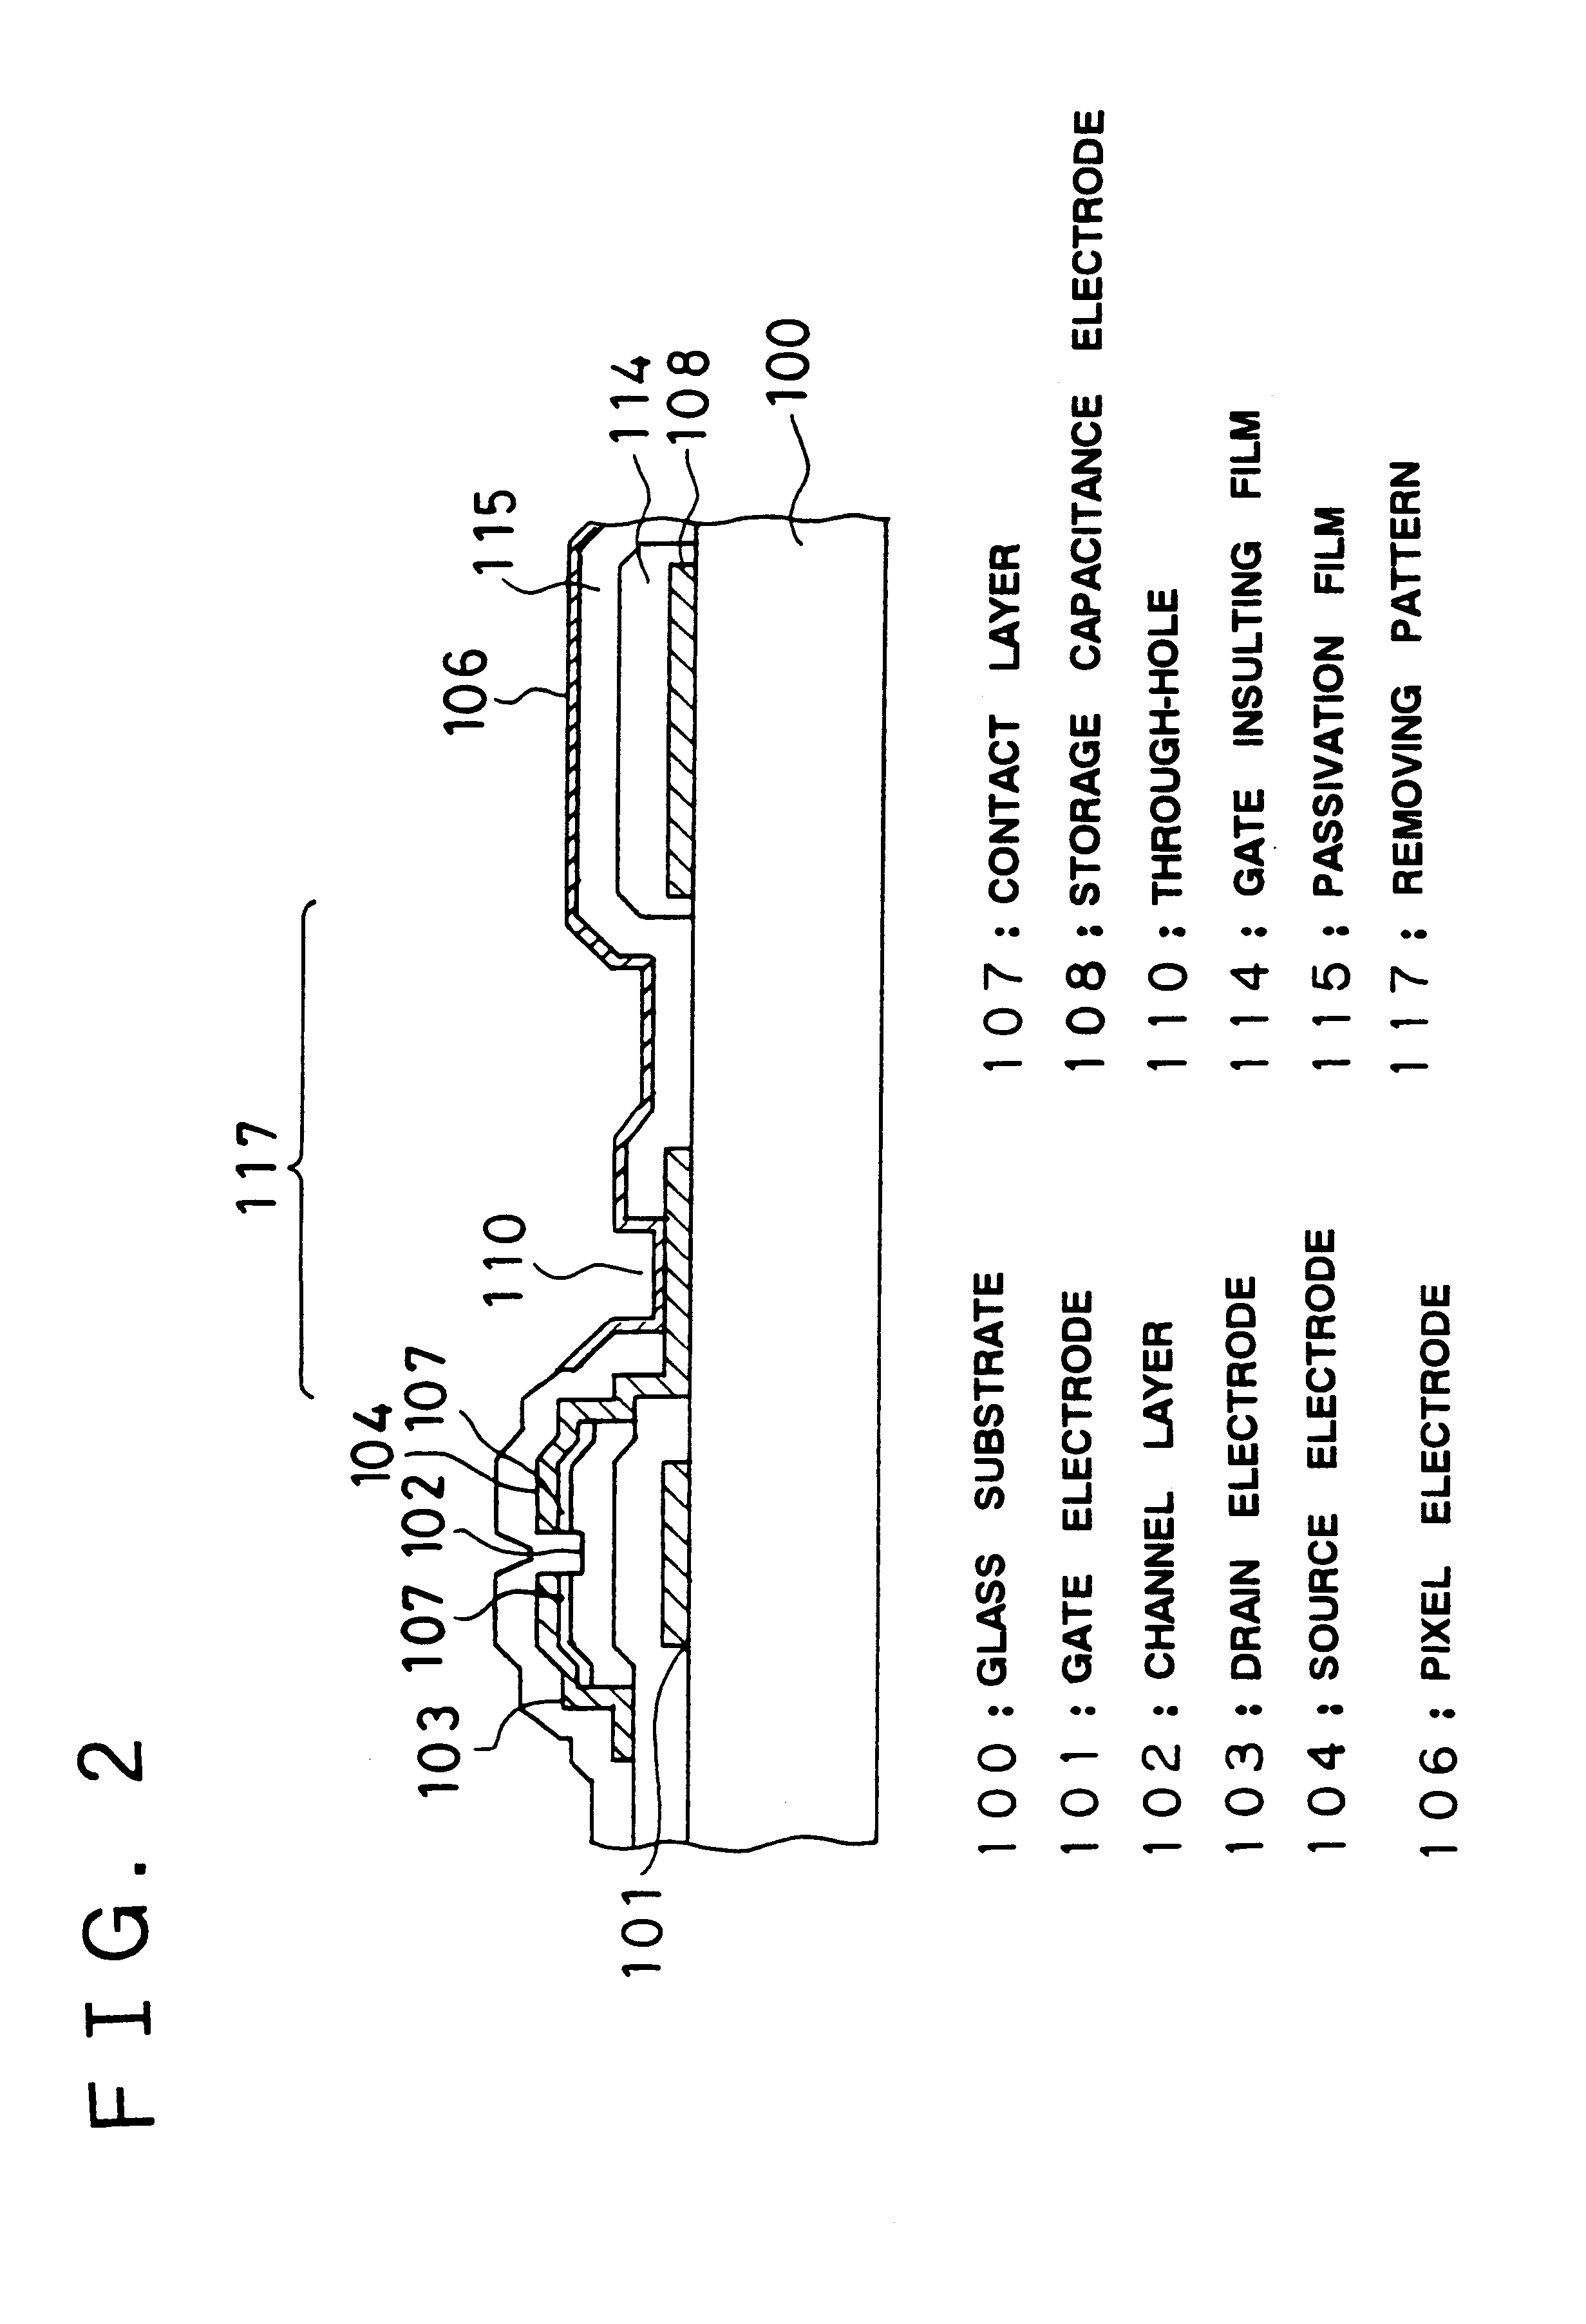 Thin-film transistor array and method for manufacturing same